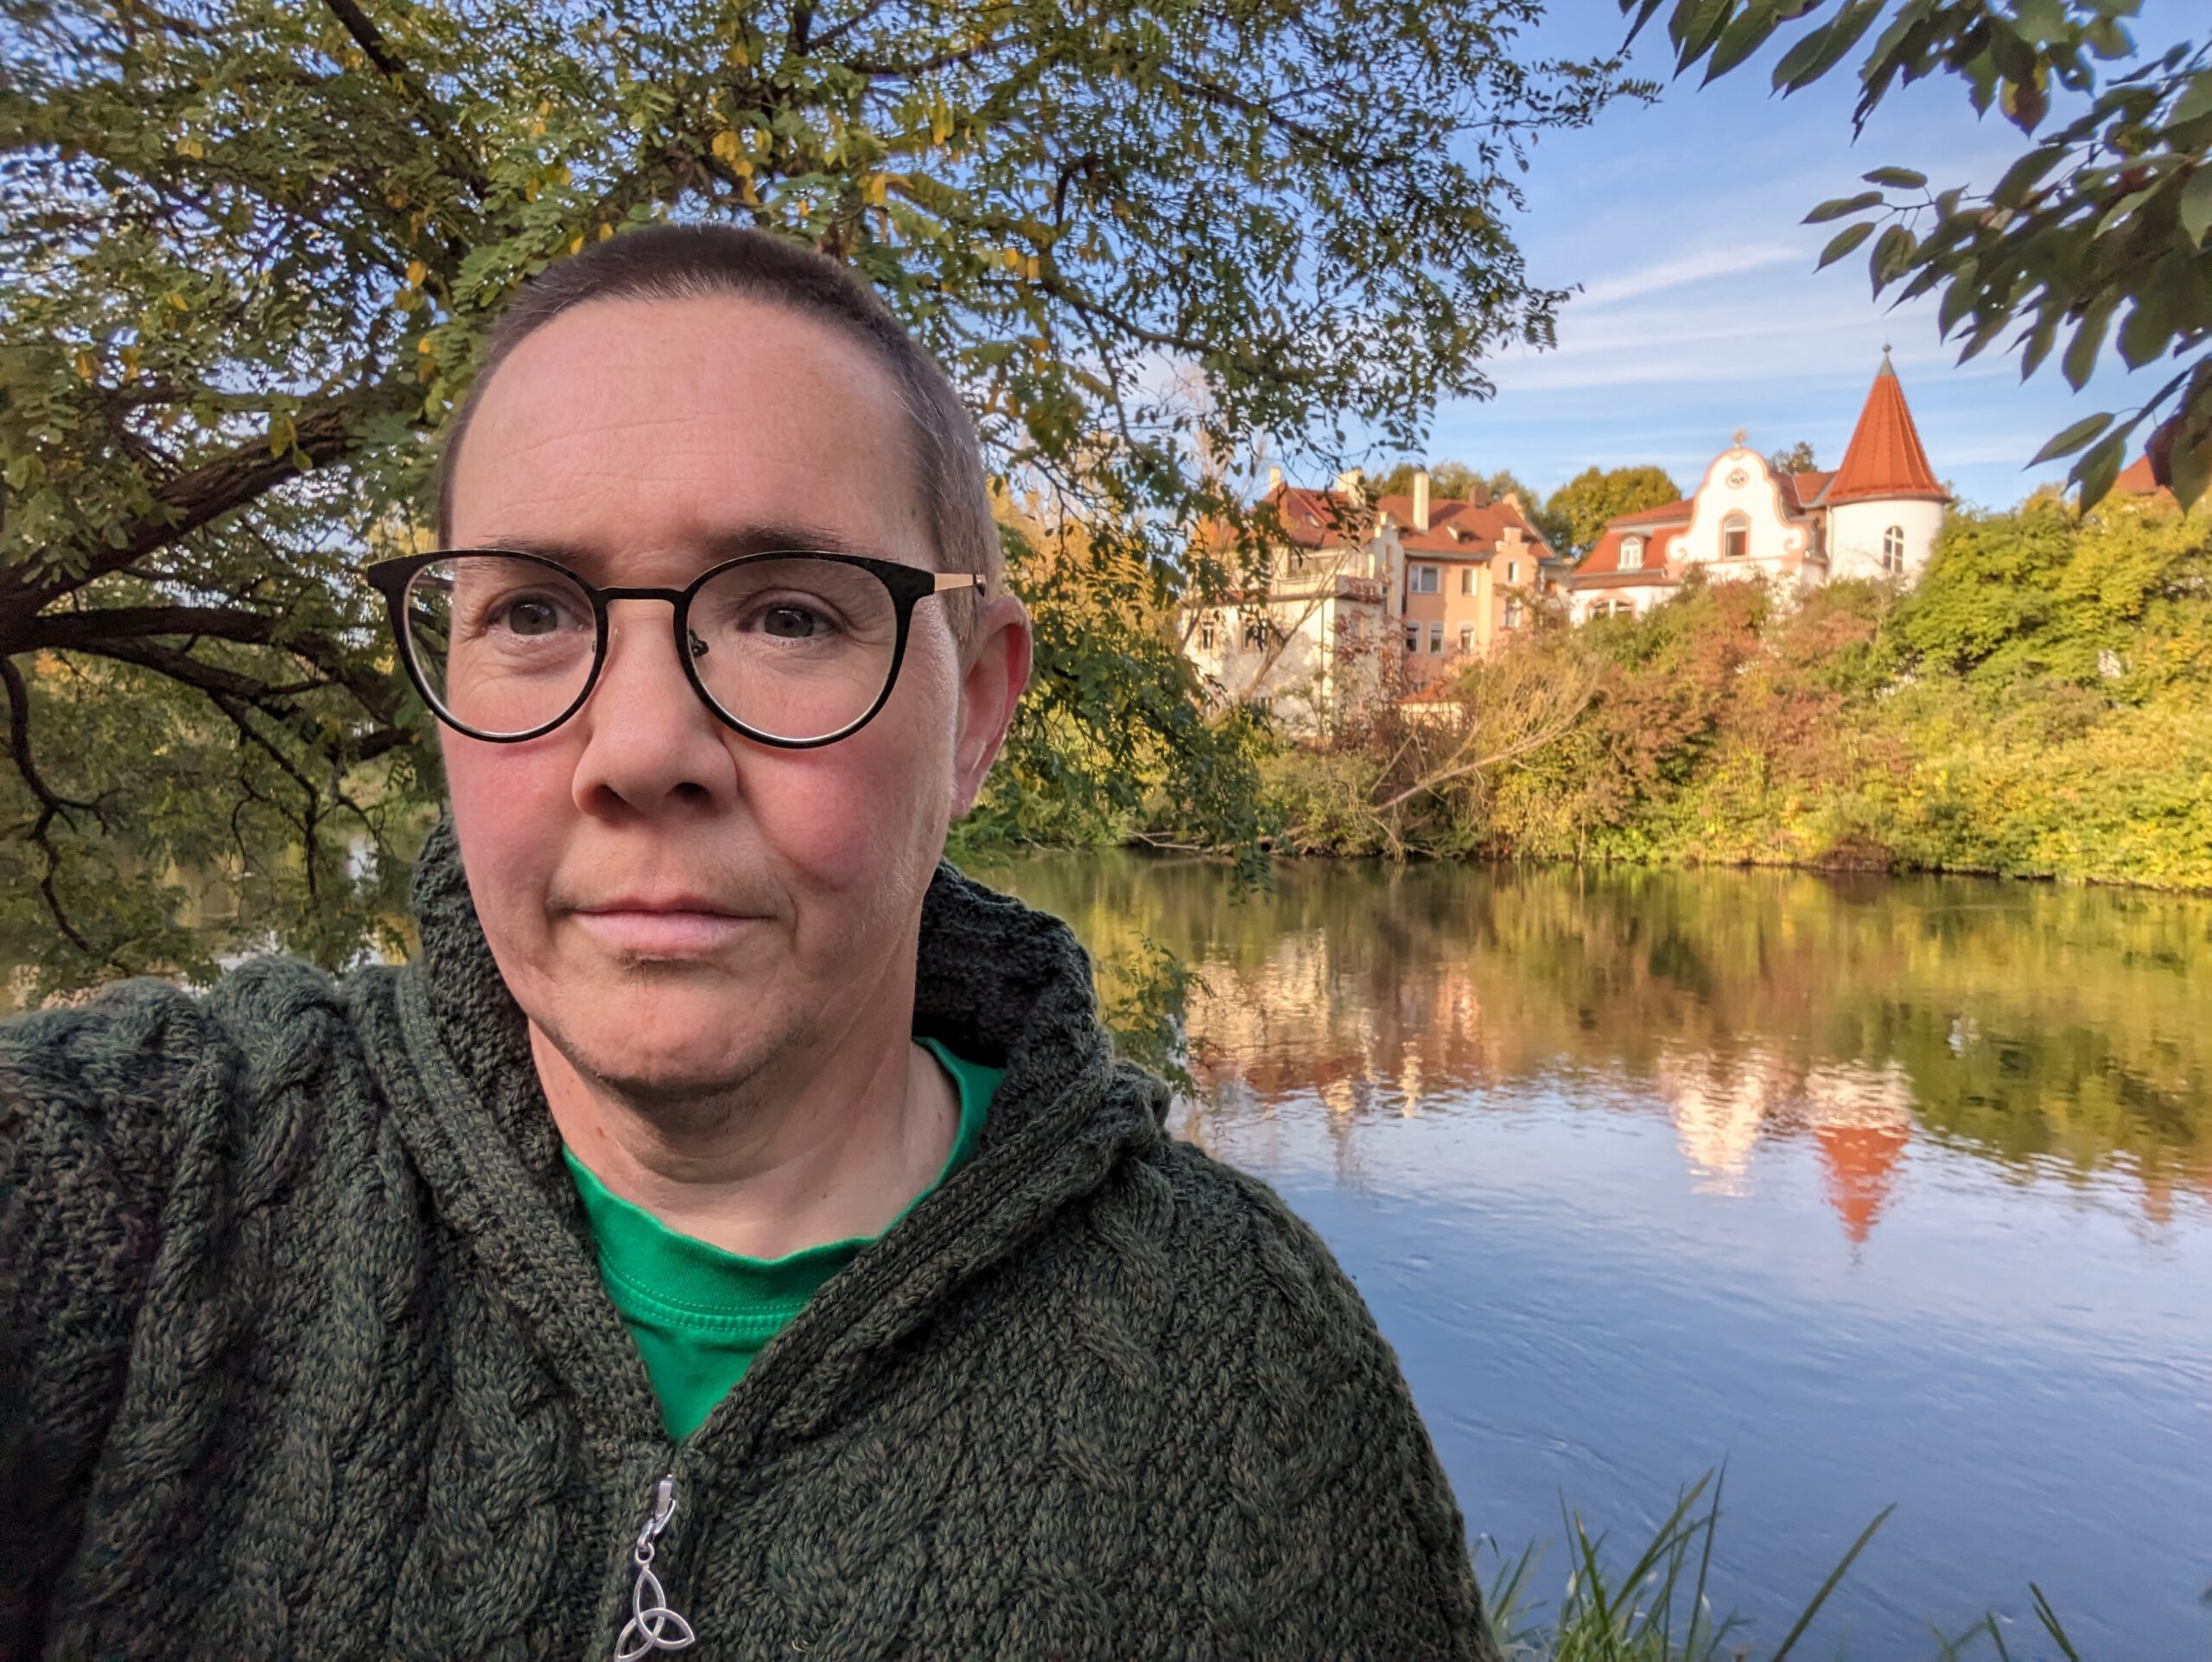 Sarah Swift standing by the river in Bamberg